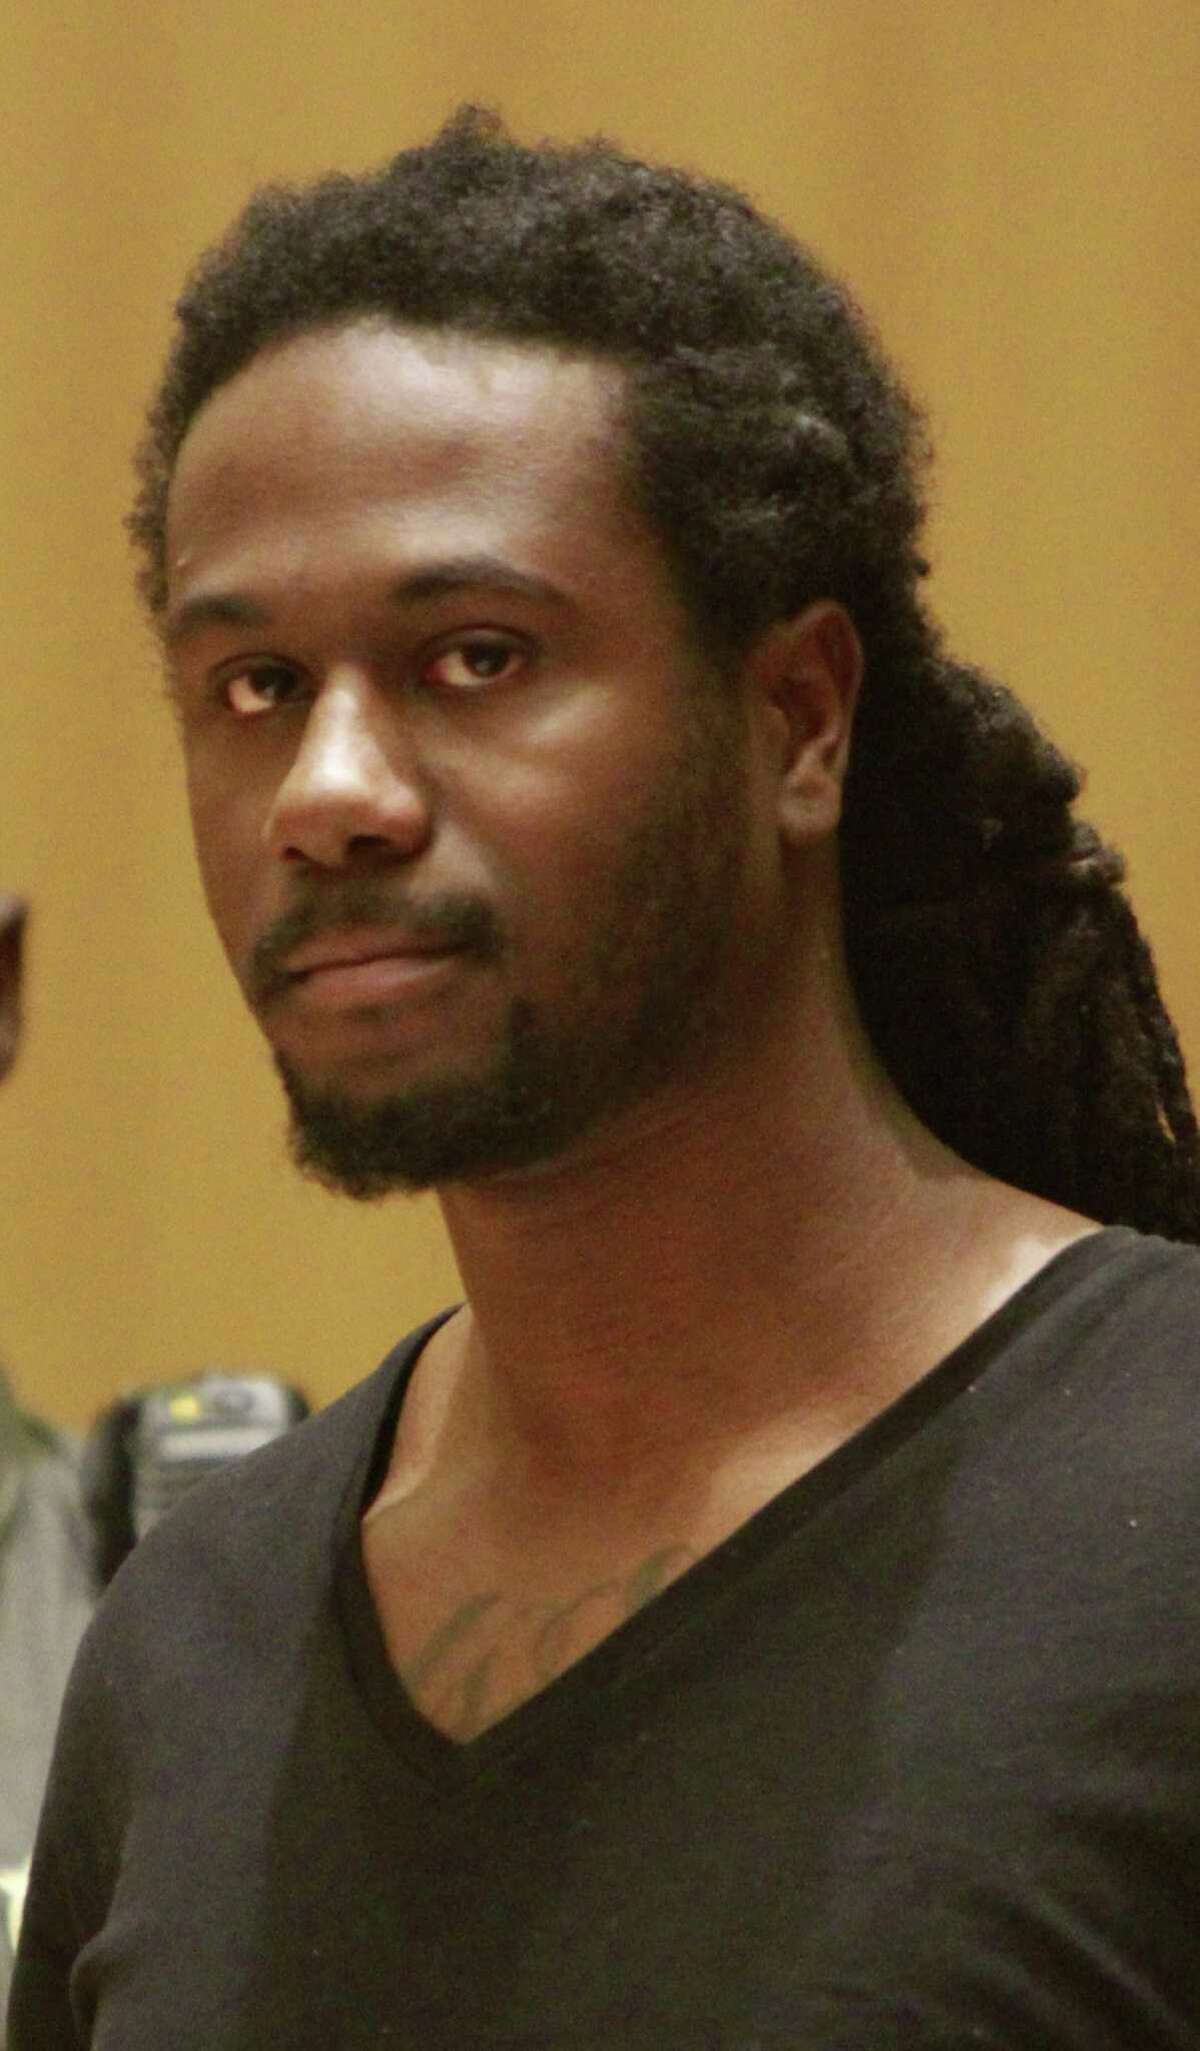 DeShawn Hayes. stands with his court appointed Public Defender Howard Ehring during his arraignment at Connecticut Superior Court on Nov. 3, 2015 in Stamford. Hayes is charged with Conspiracy to Murder in connection with the shooting death of a 43-year-old woman found Monday night in Lione Park of Stamford's West Side.